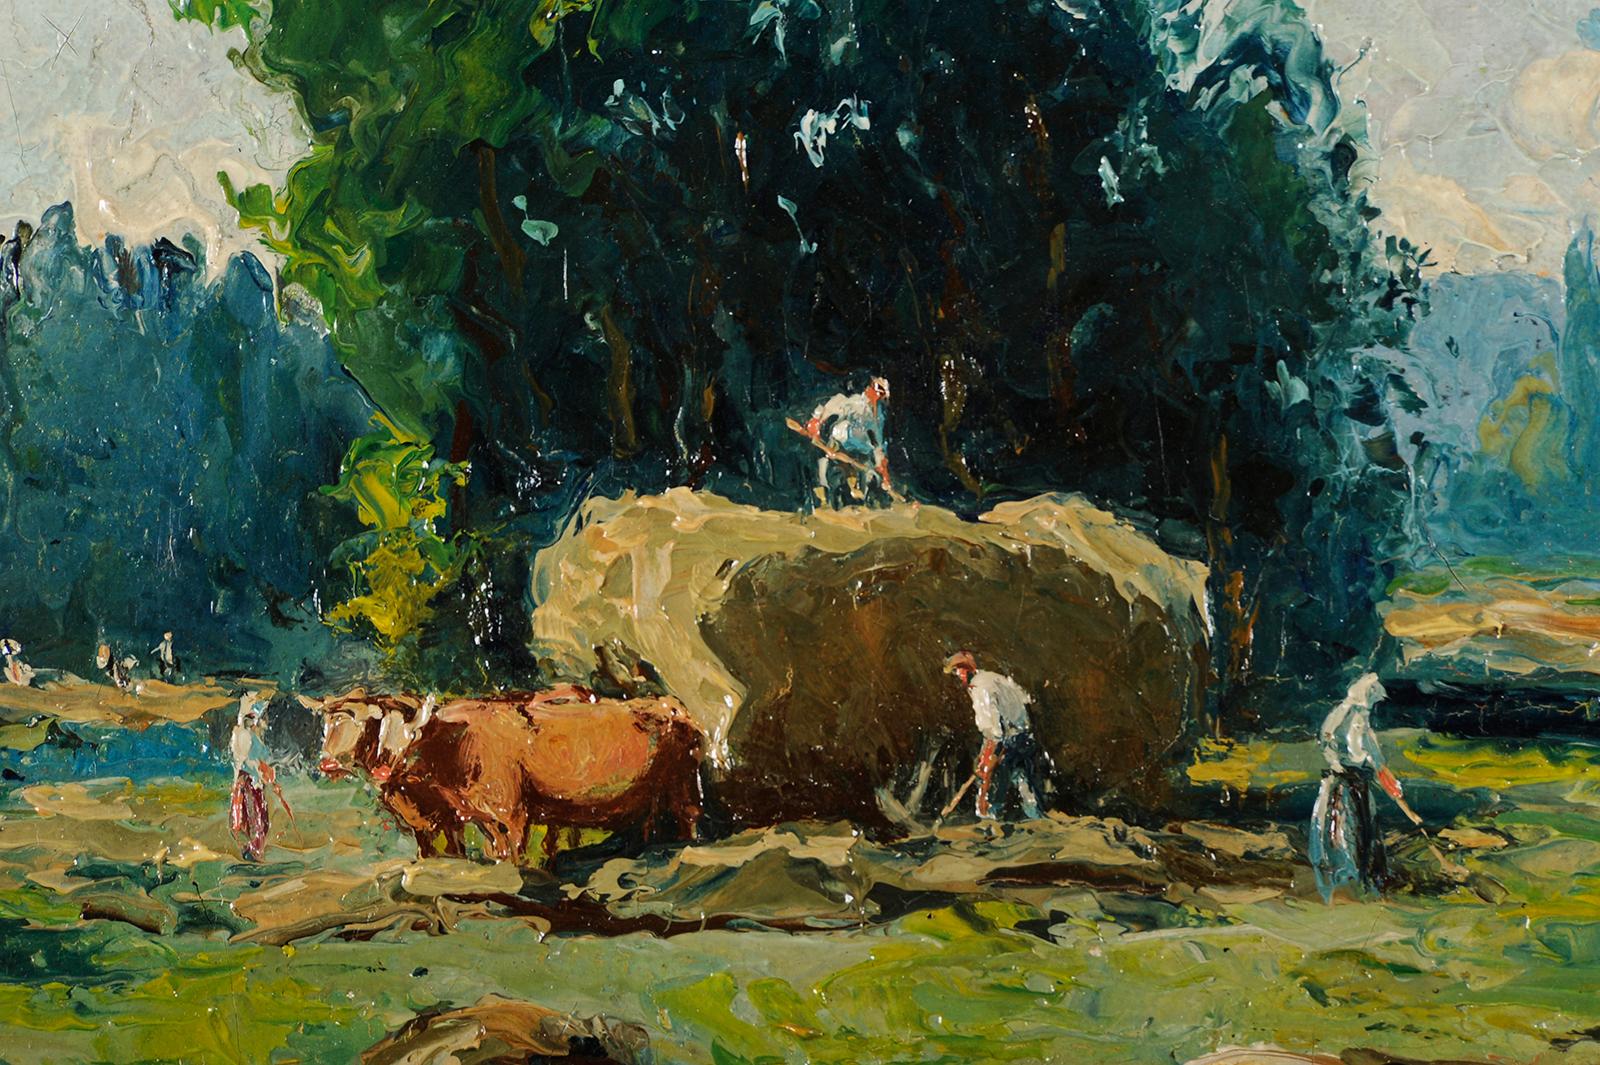 Camille MERLAUD
(Verteillac 1877 - 1957)
Collecting hay
Oil on canvas and oil on panel
H. 23 cm; L. 34 cm each
Signed

Provenance: Private collection, Gironde

Born in Verteillac in the heart of the canton of Ribérac, Camille Merlaud remains in the